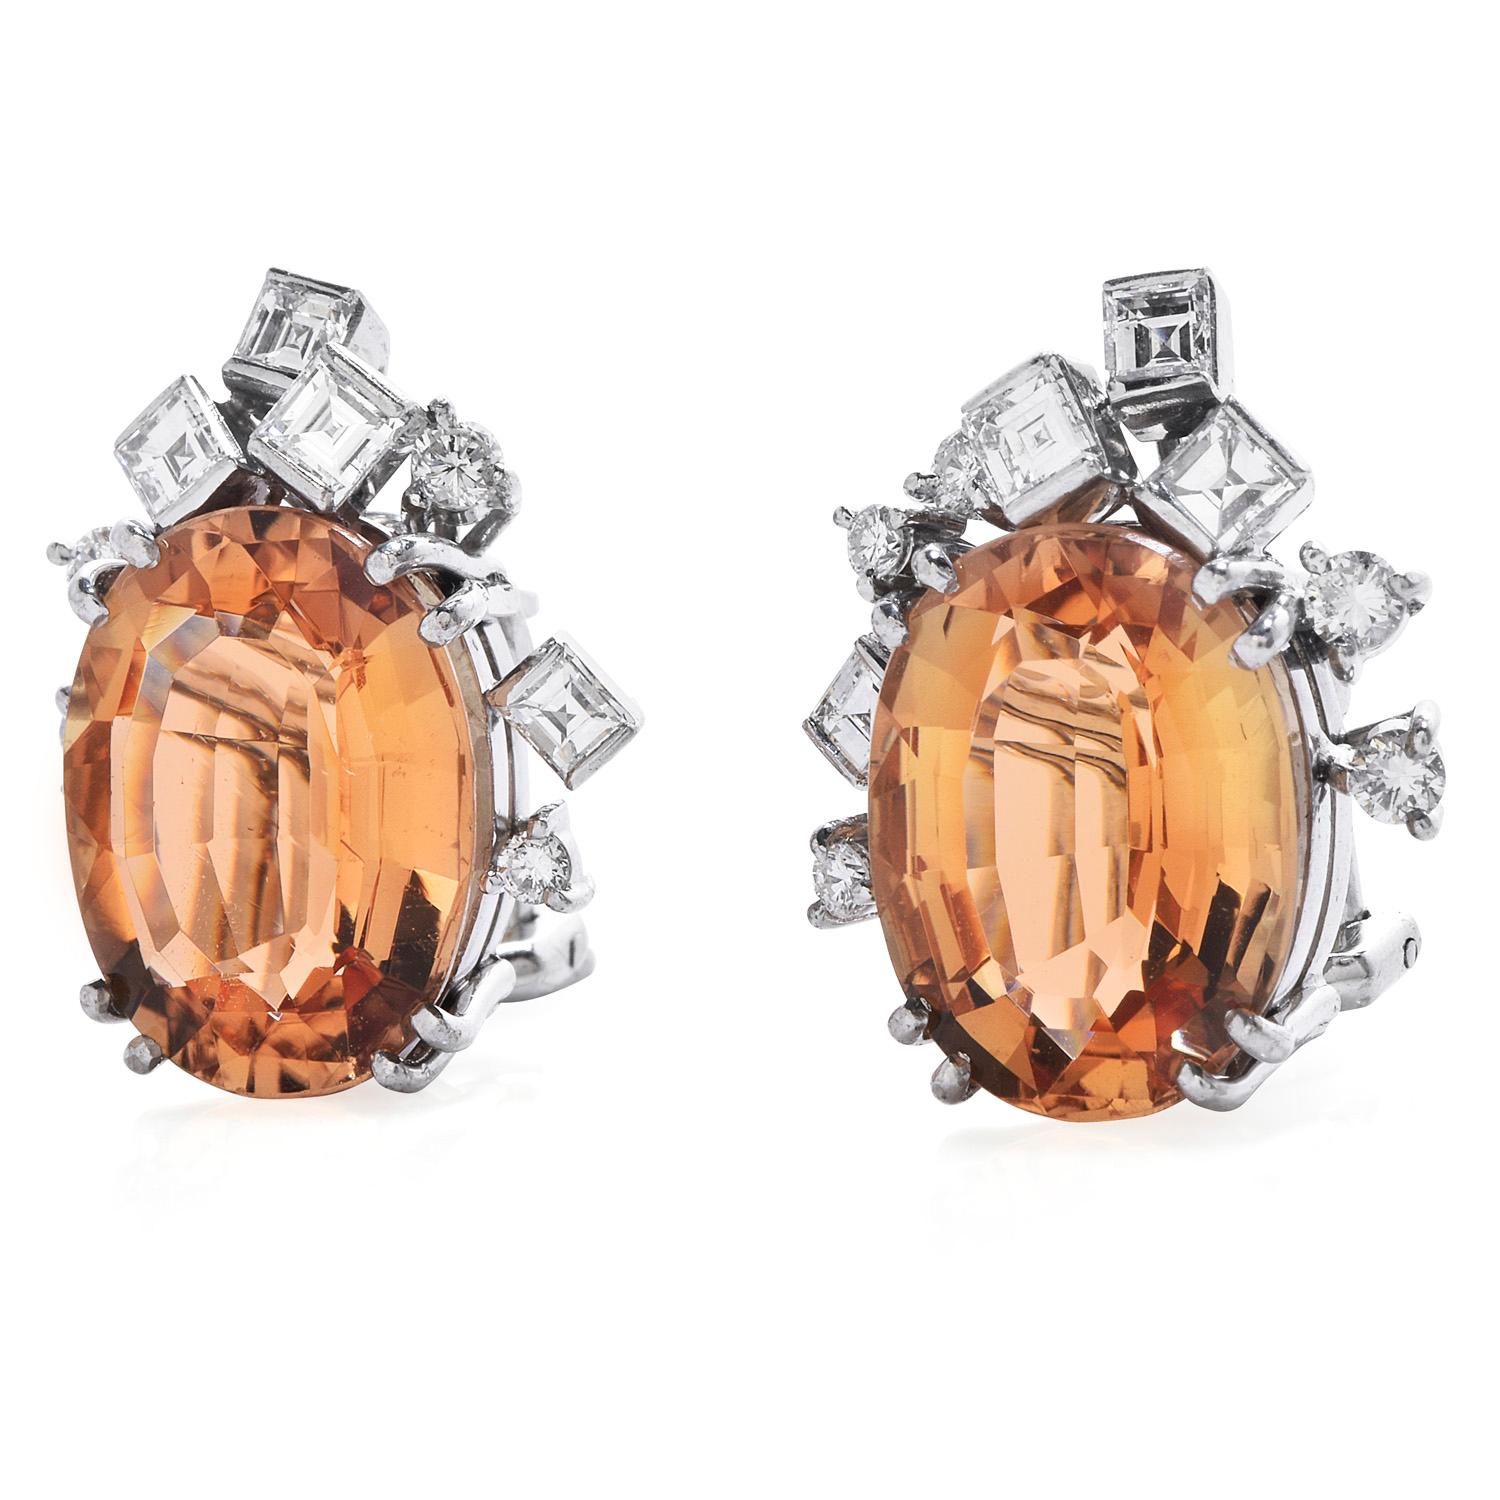 Vintage GIA 12.85ct Yellow Orange imperial Topaz Diamond 18K Gold Earrings

Add a Splash of color to your life

These exquisite Topaz earrings are reminiscent of the Sunrise and have an approximate total weight of 11.0 Grams.

Expertly Crafted in